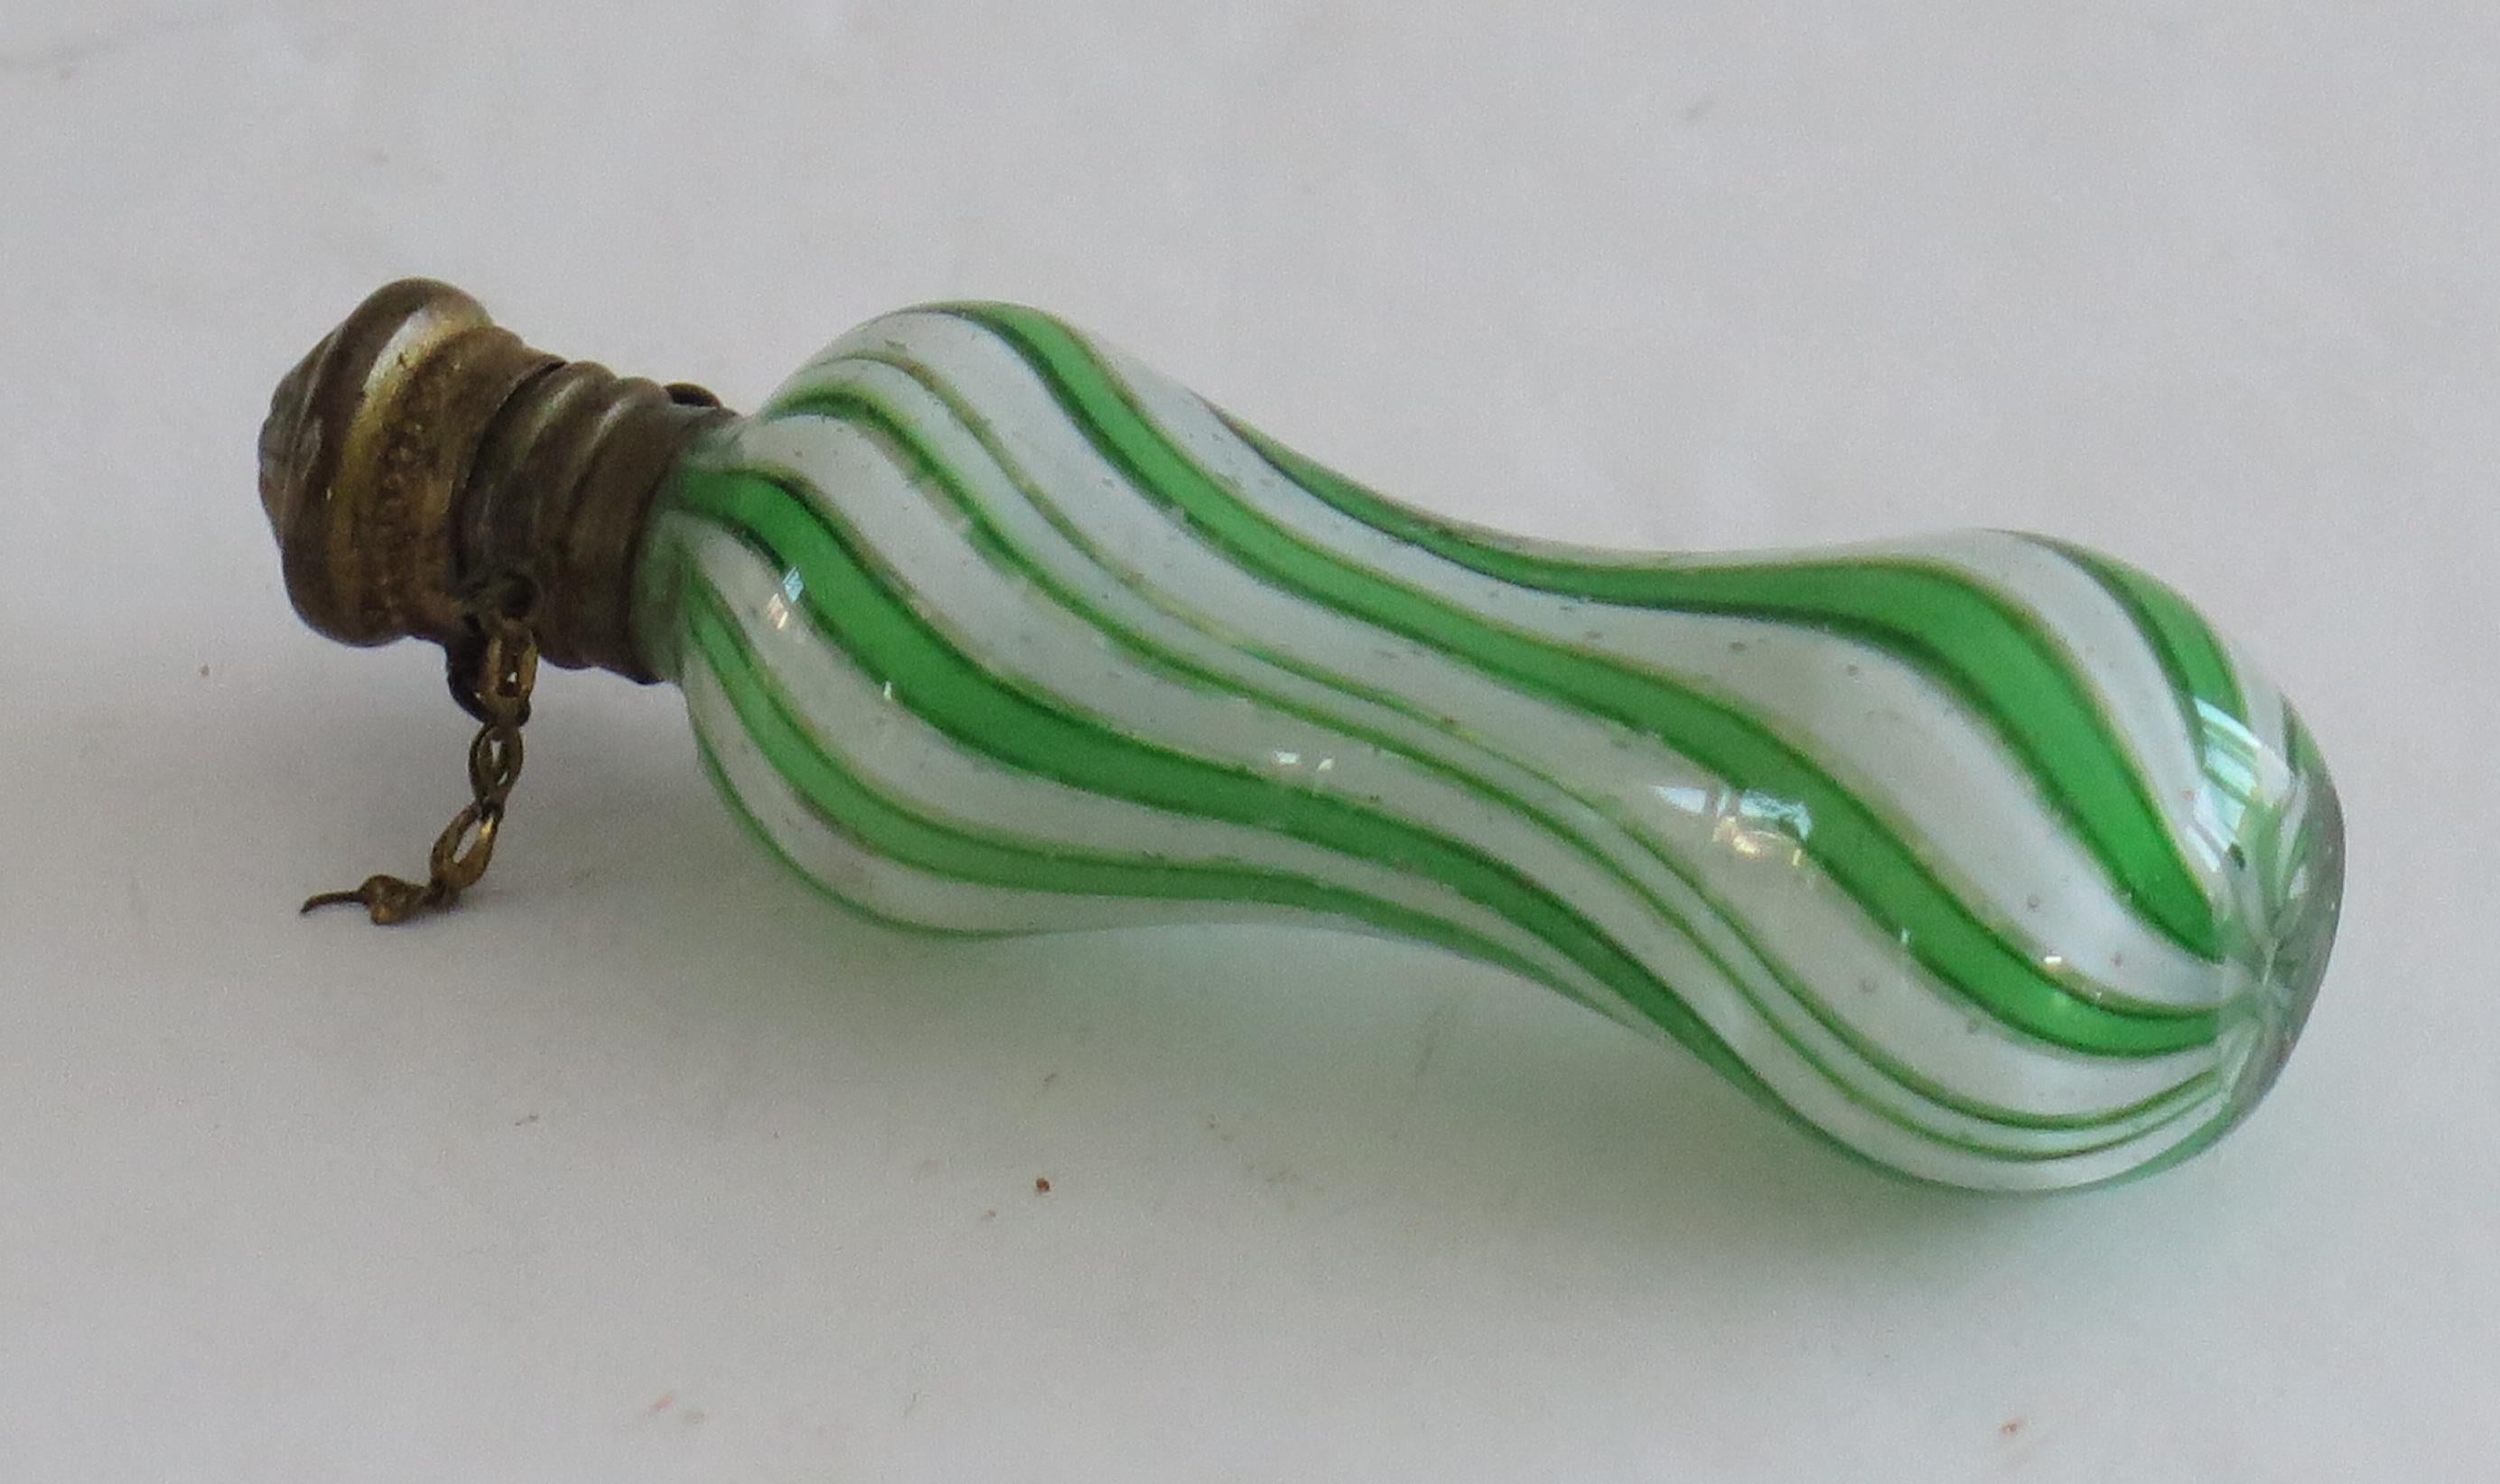 This is an antique spiral glass perfume or scent bottle, that we attribute to Clichy, France, made circa 1850.

The bottle is hand made of a green and white latticino swirling or spiral stripes (canes) in cased clear glass with a waisted form. It